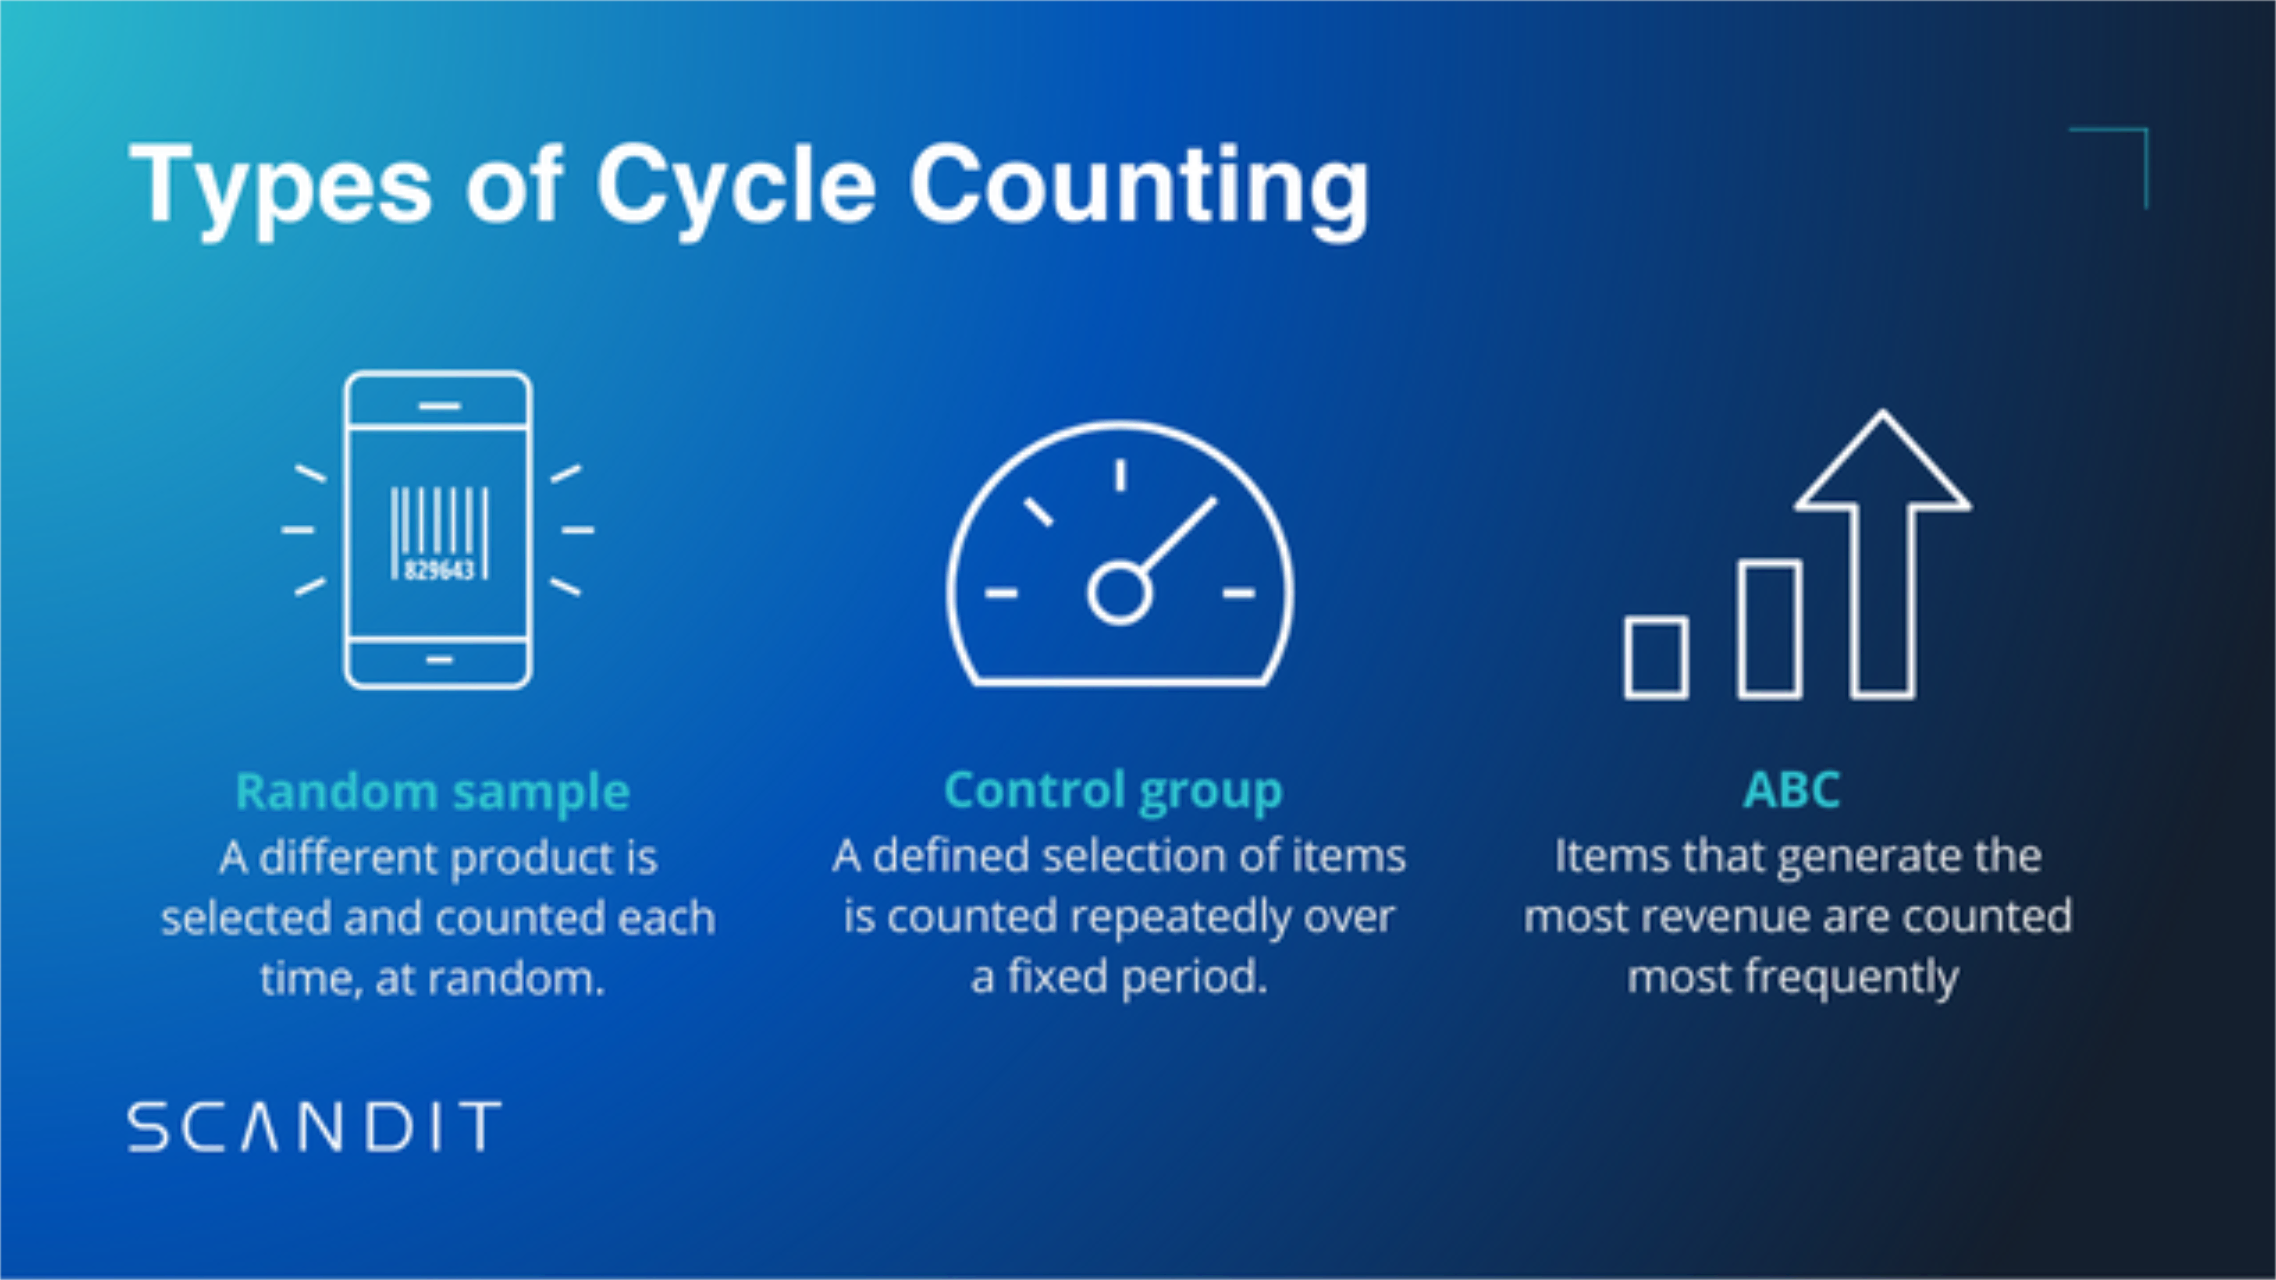 Graphic showing three different types of cycle counting: Random Sample, Control Group and ABC.